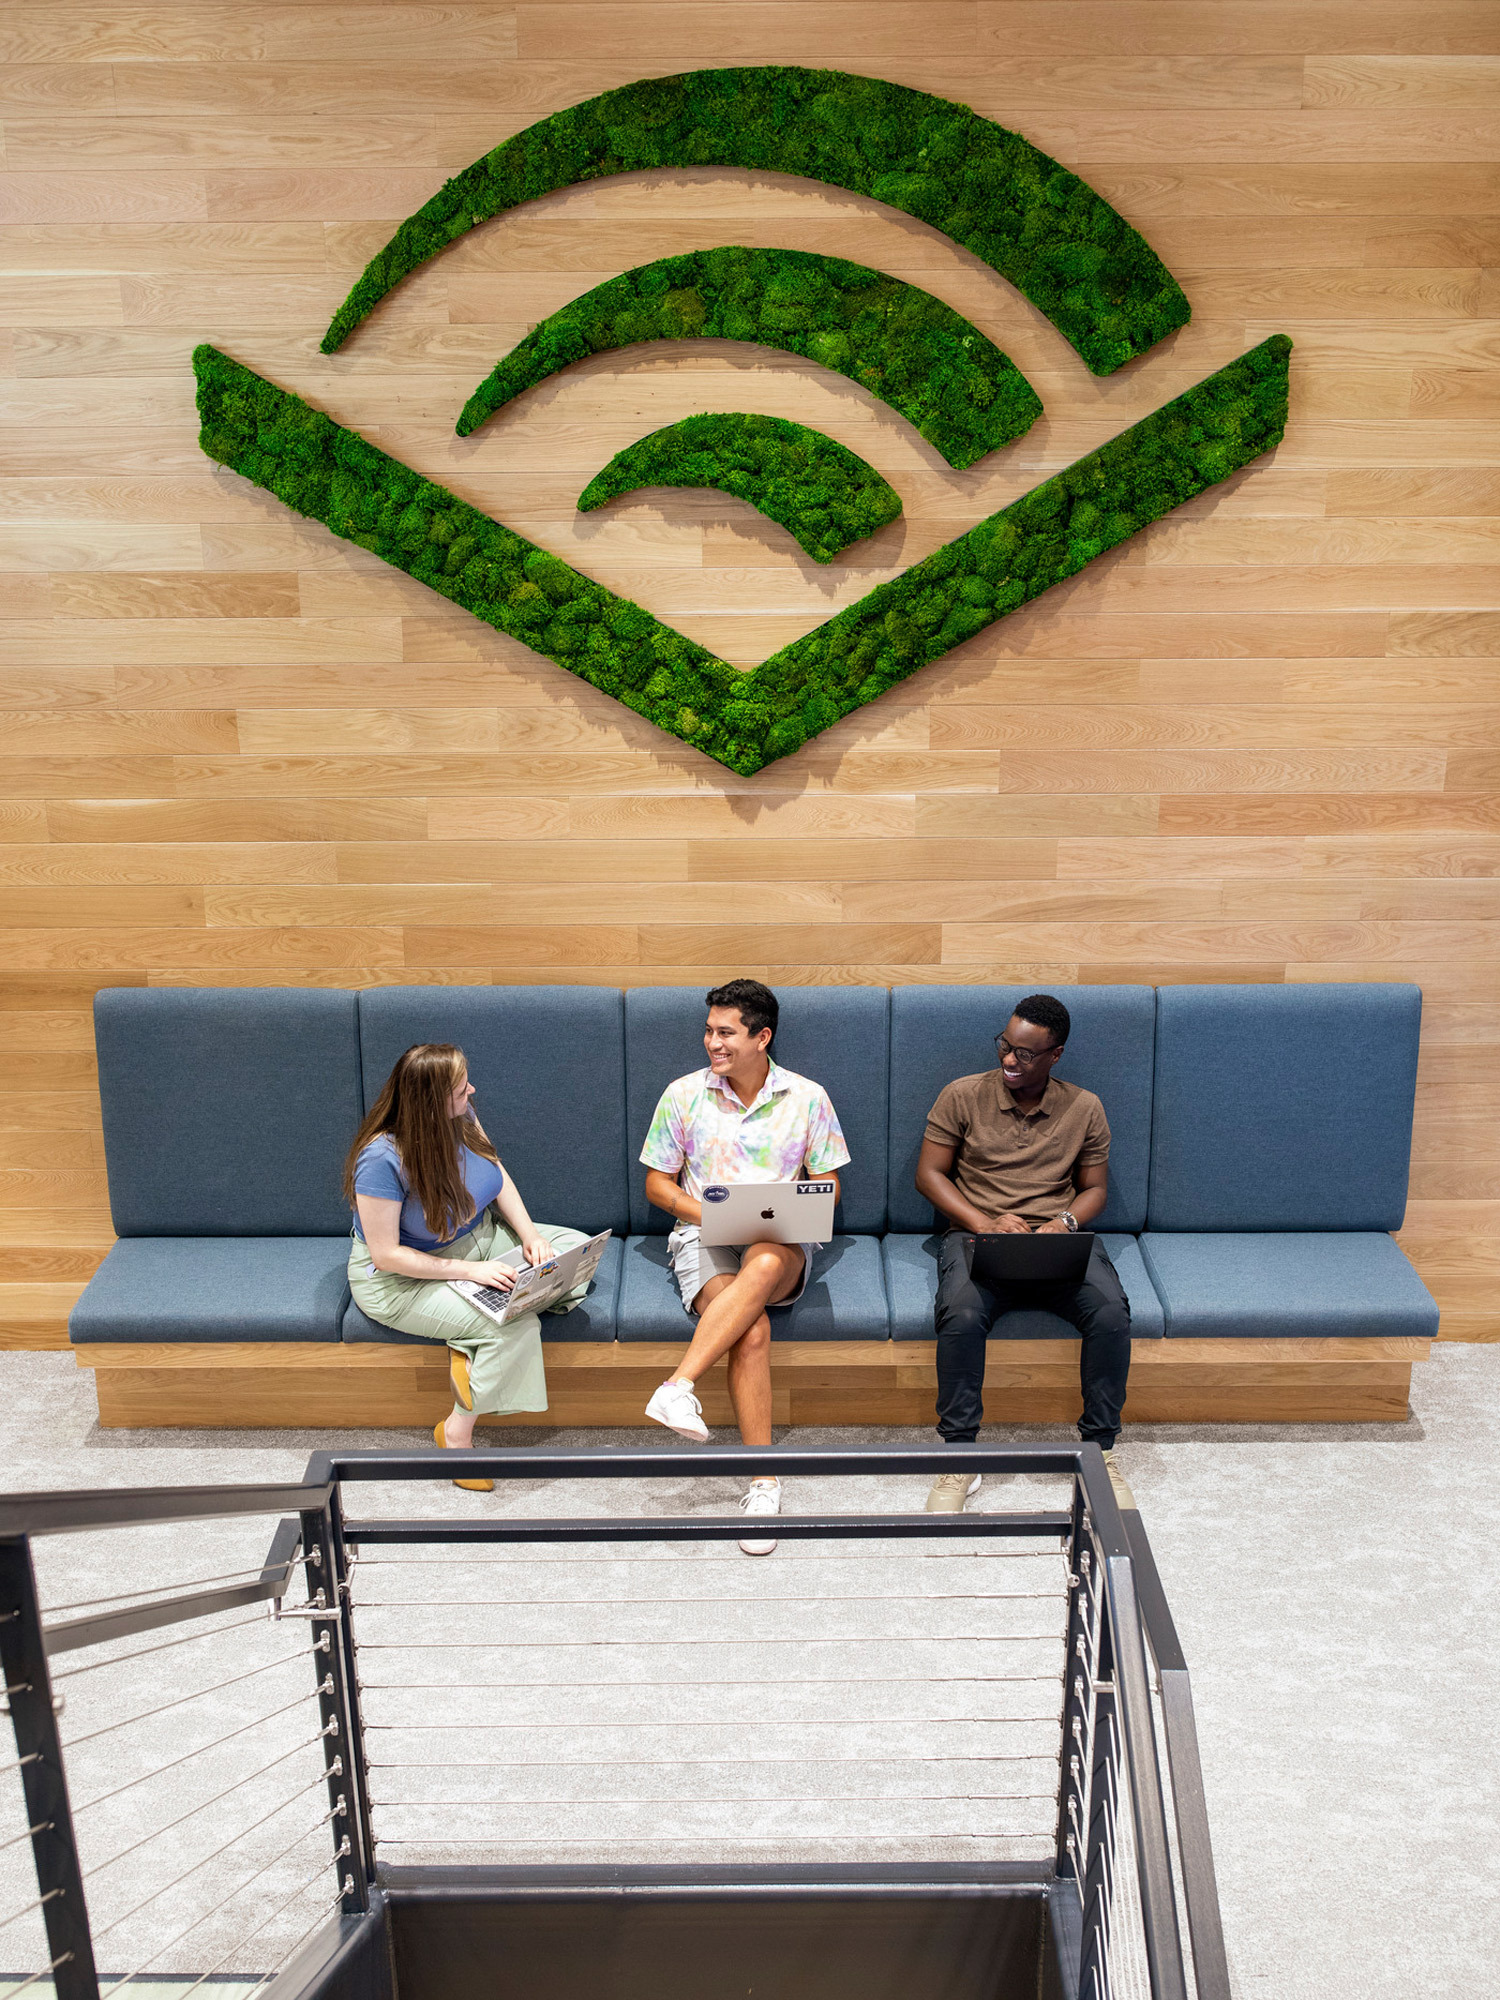 A vibrant workplace lounge with a wooden wall featuring a large green Wi-Fi symbol, flanked by a comfortable blue bench where three individuals engage in conversation and work.